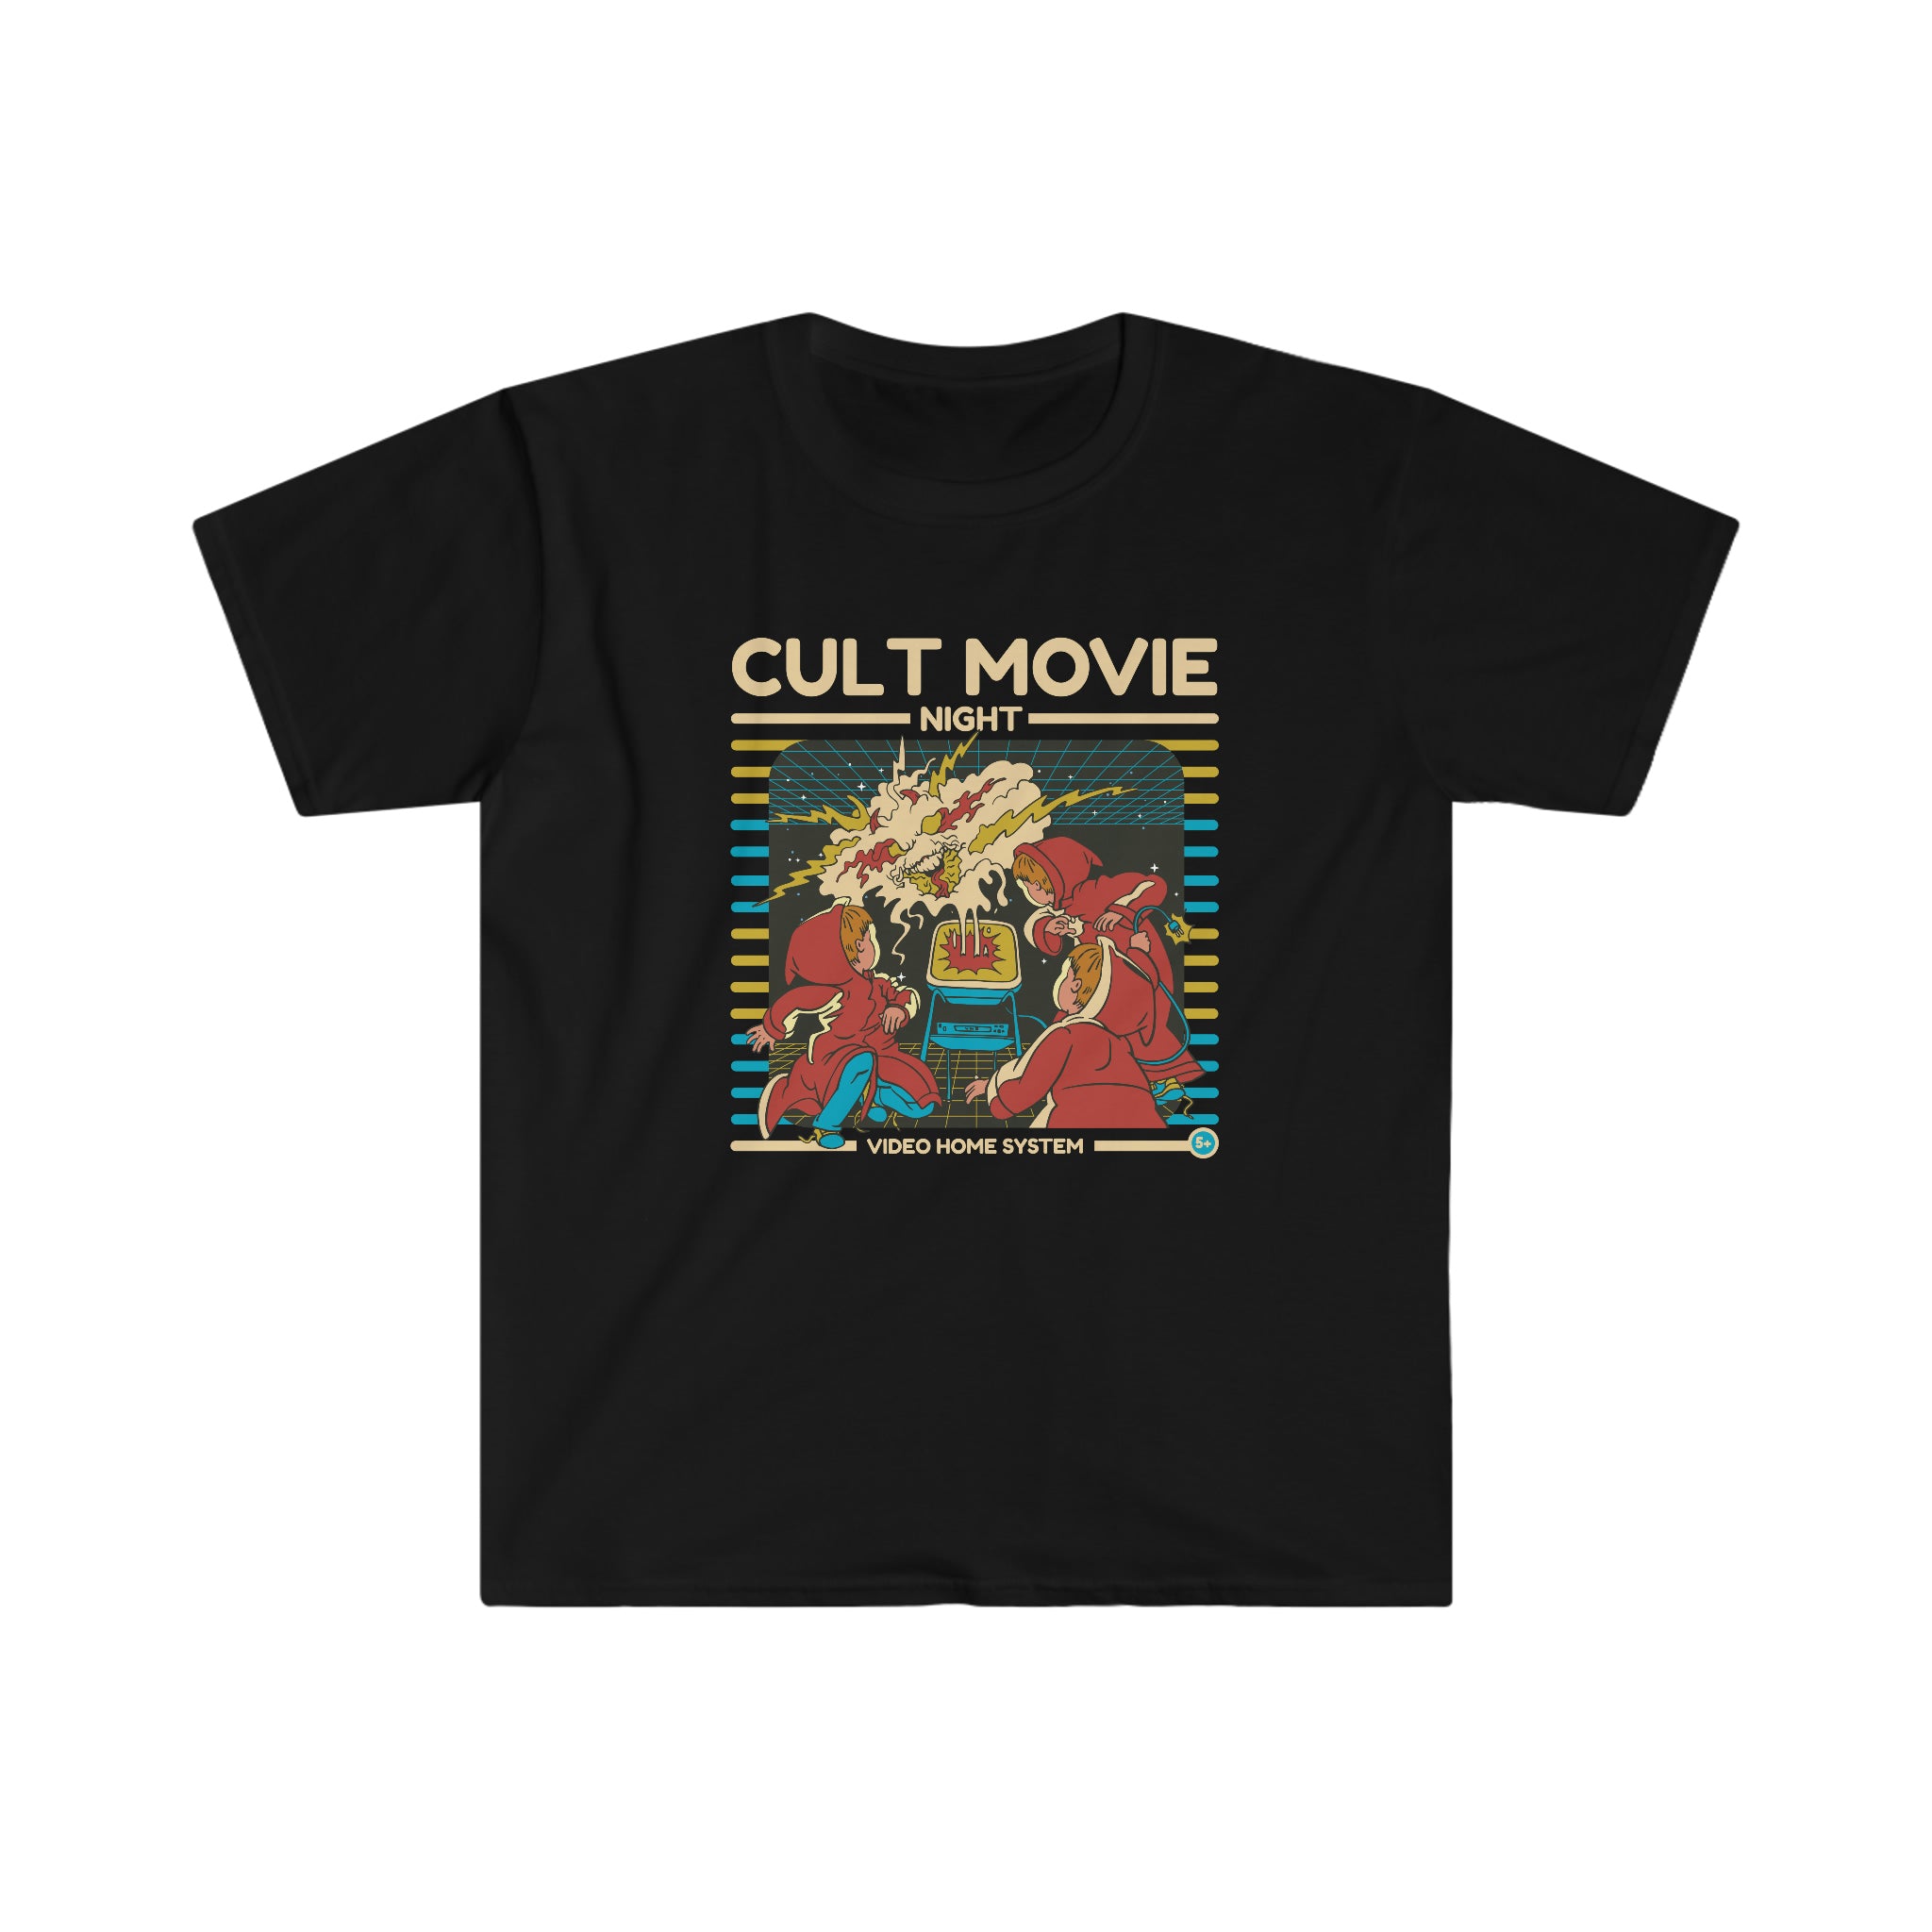 One Tee Project Cult Movie Night t-shirt.